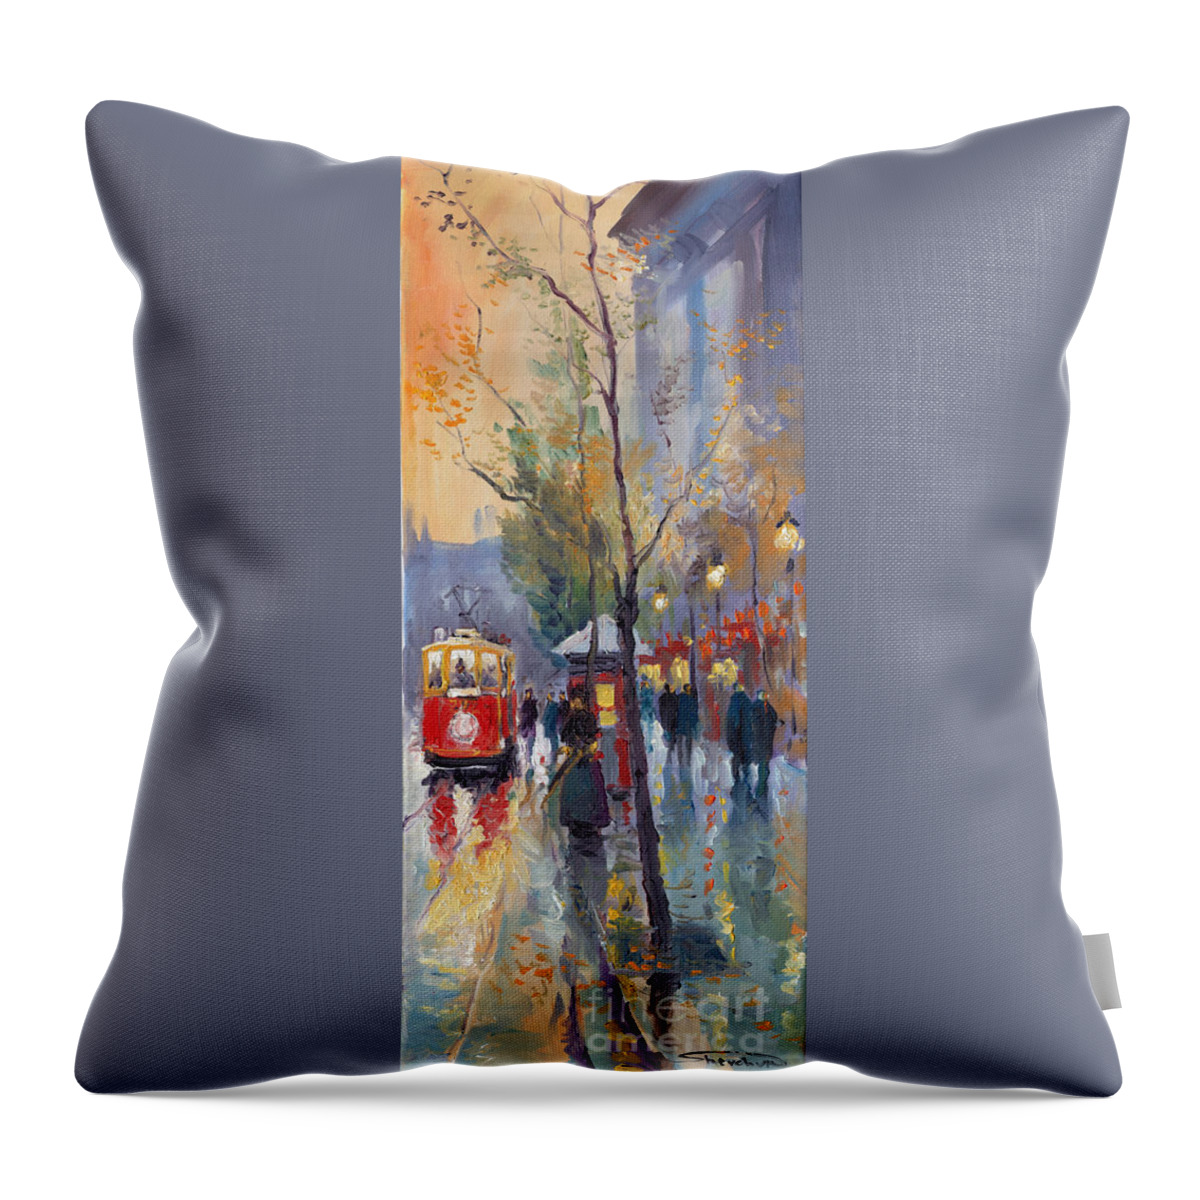 Prague Throw Pillow featuring the painting Prague Old Tram Vaclavske Square by Yuriy Shevchuk